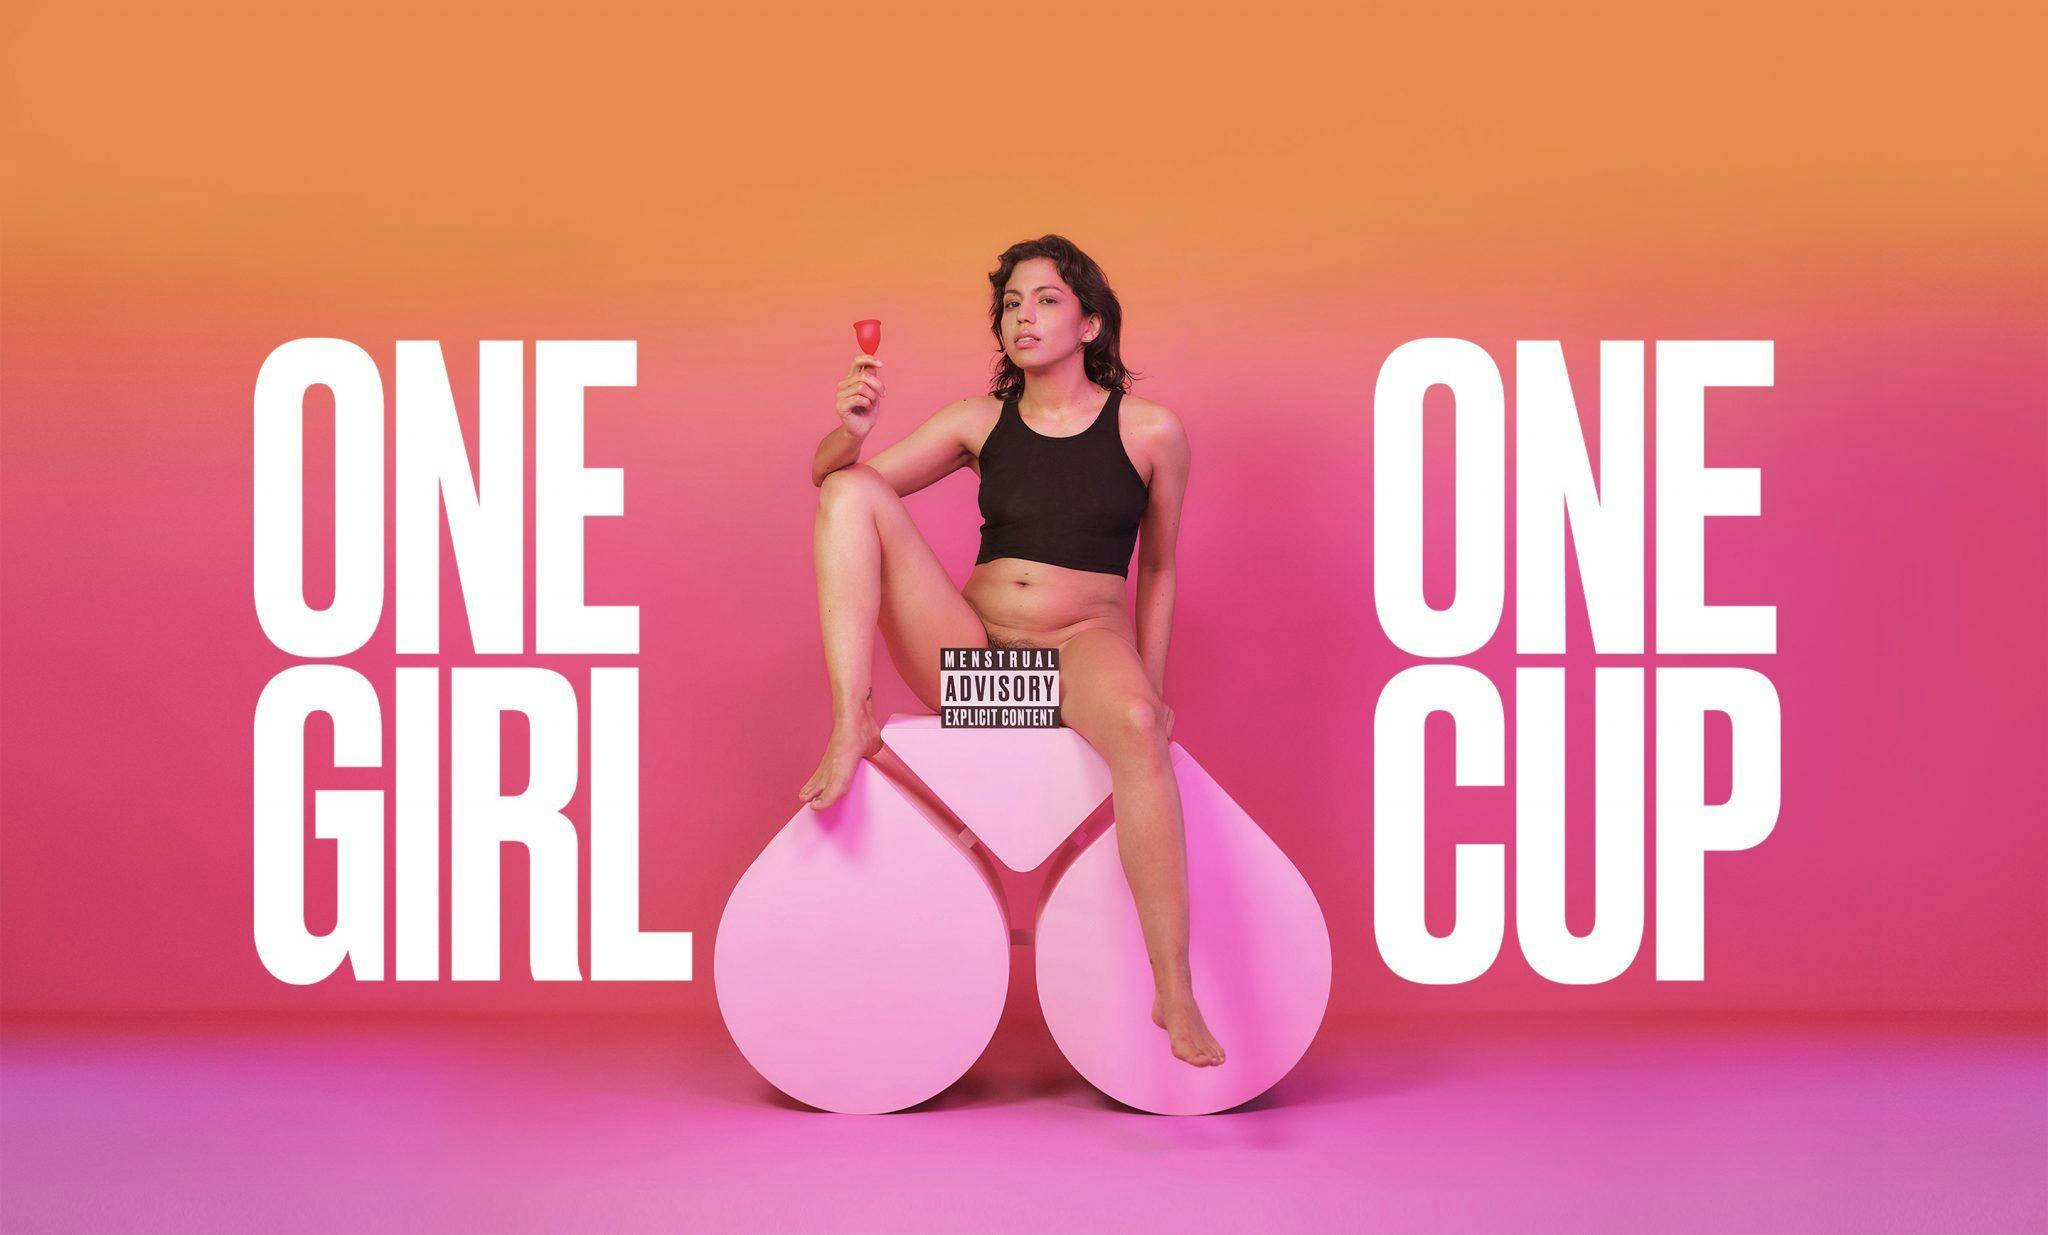 Mensturalcup Inserting Porn - Watch One Girl One Cup: An Explicit Guide to Menstrual Cups